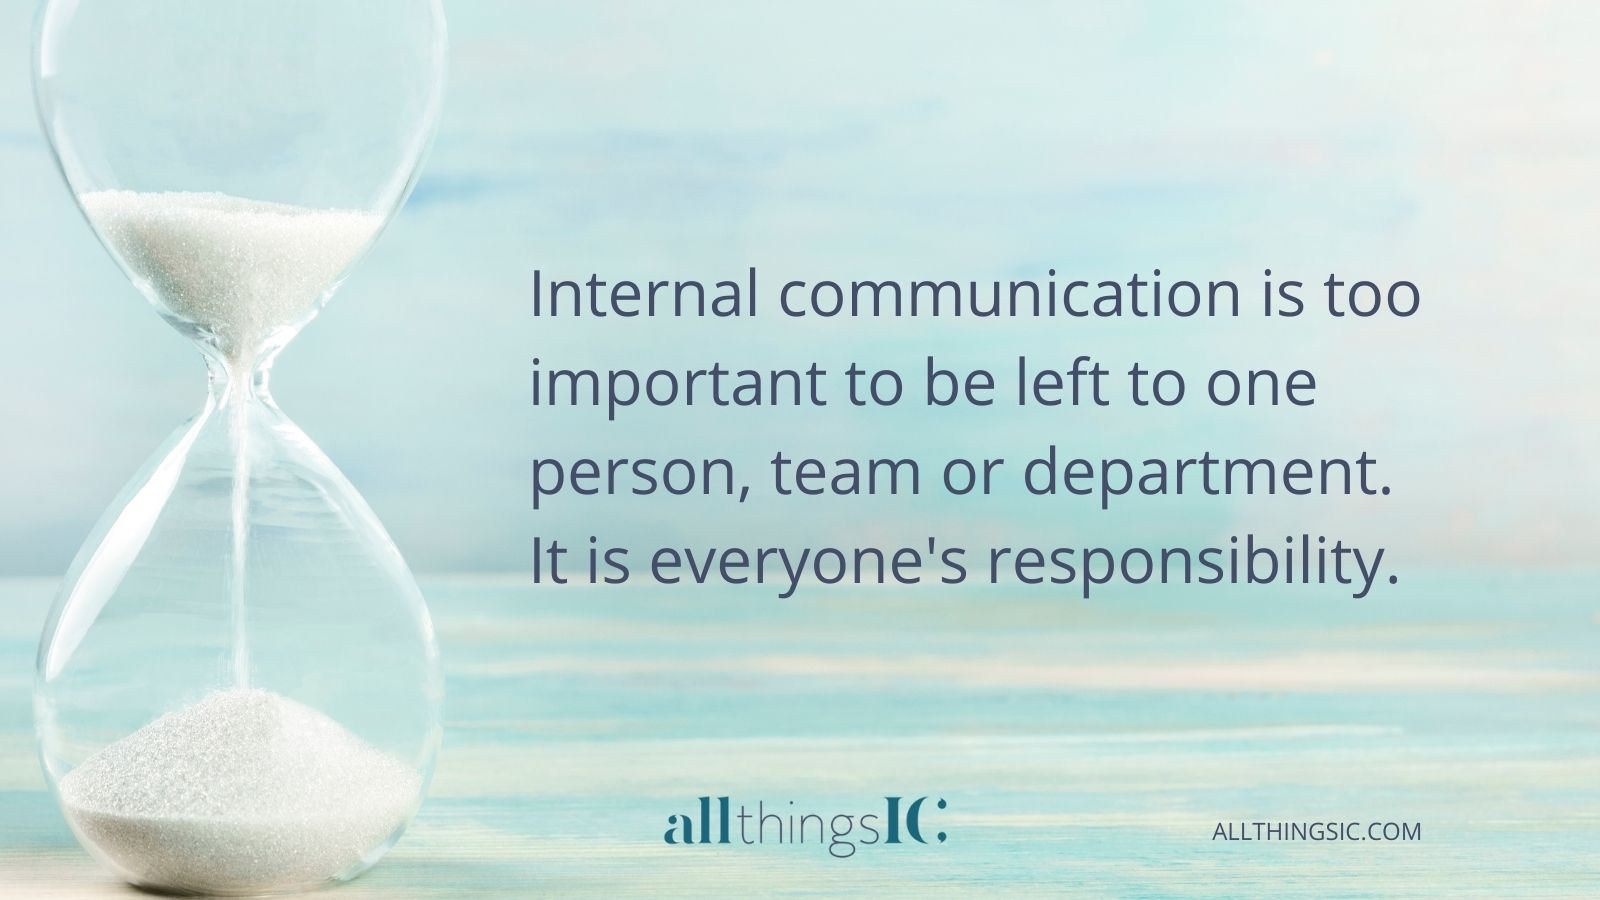 Internal communication is too important to be left to one person, team or department. It is everyone's responsibility